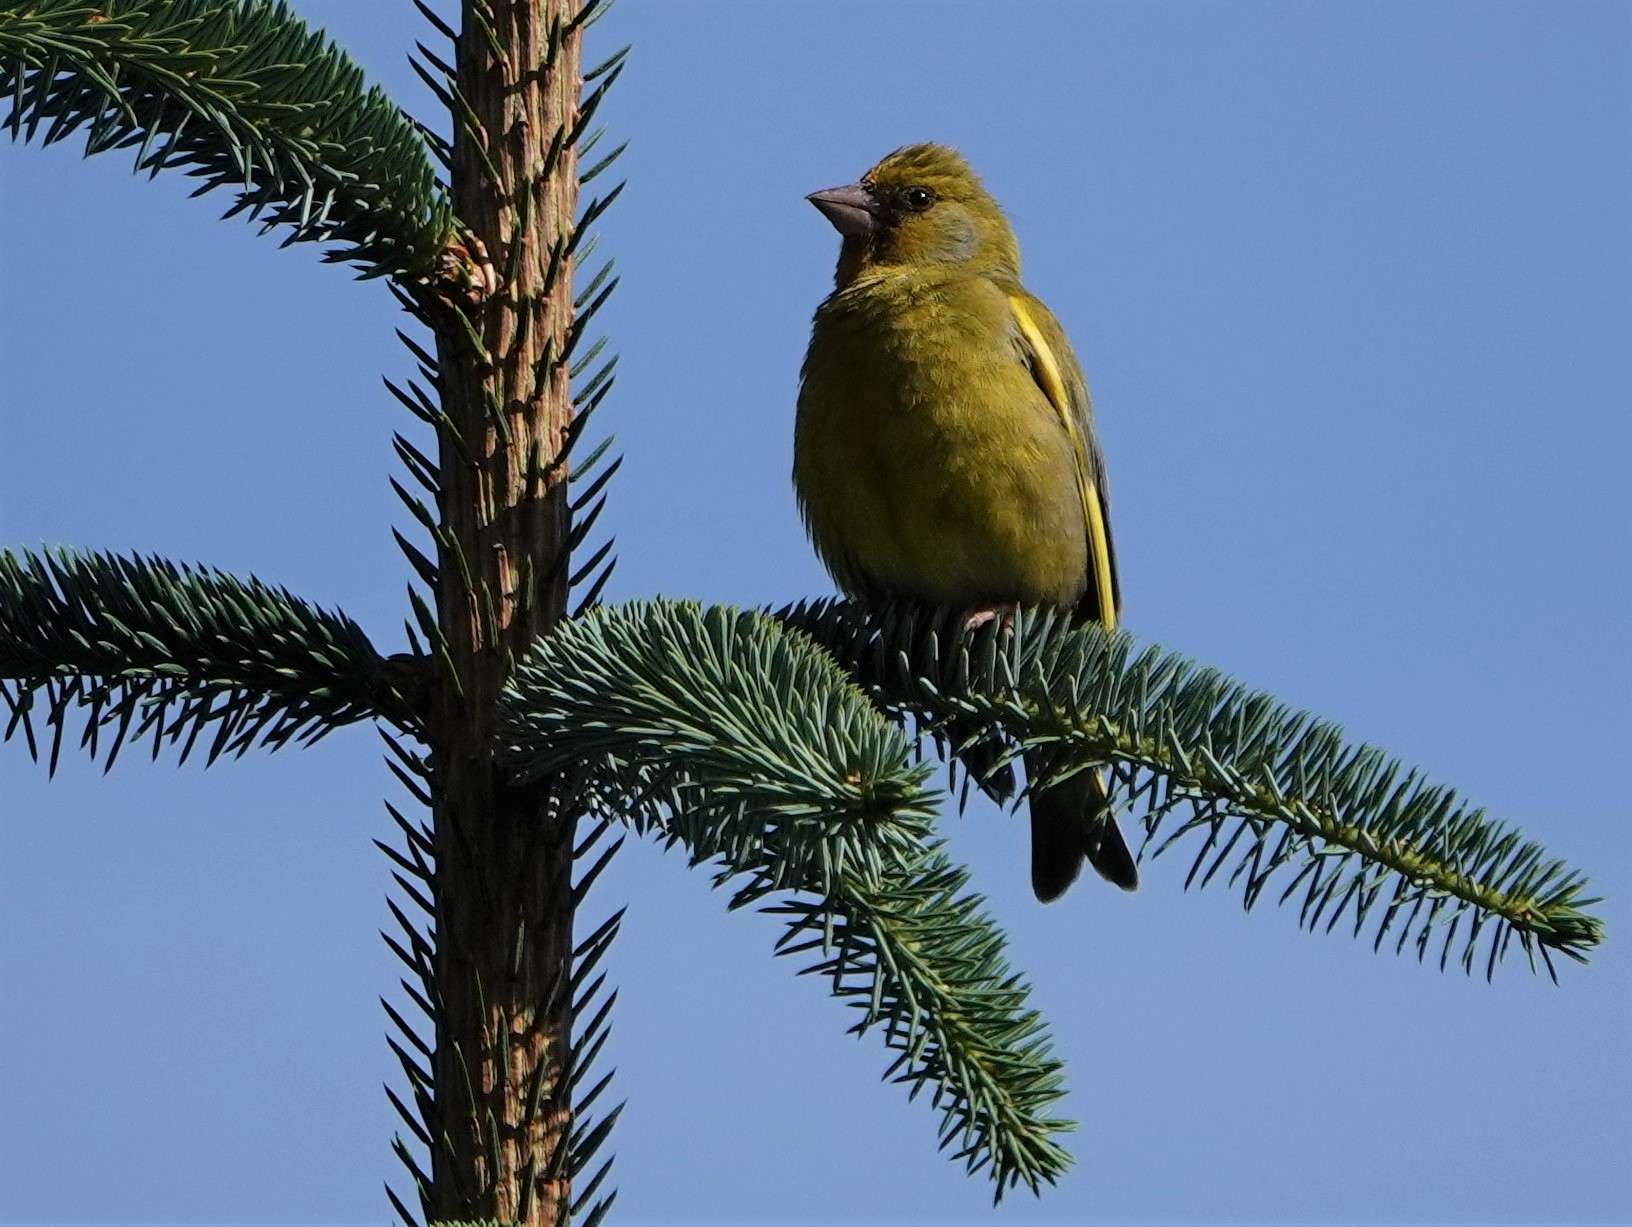 Greenfinch by Paul Howrihane at Cookworthy Forest